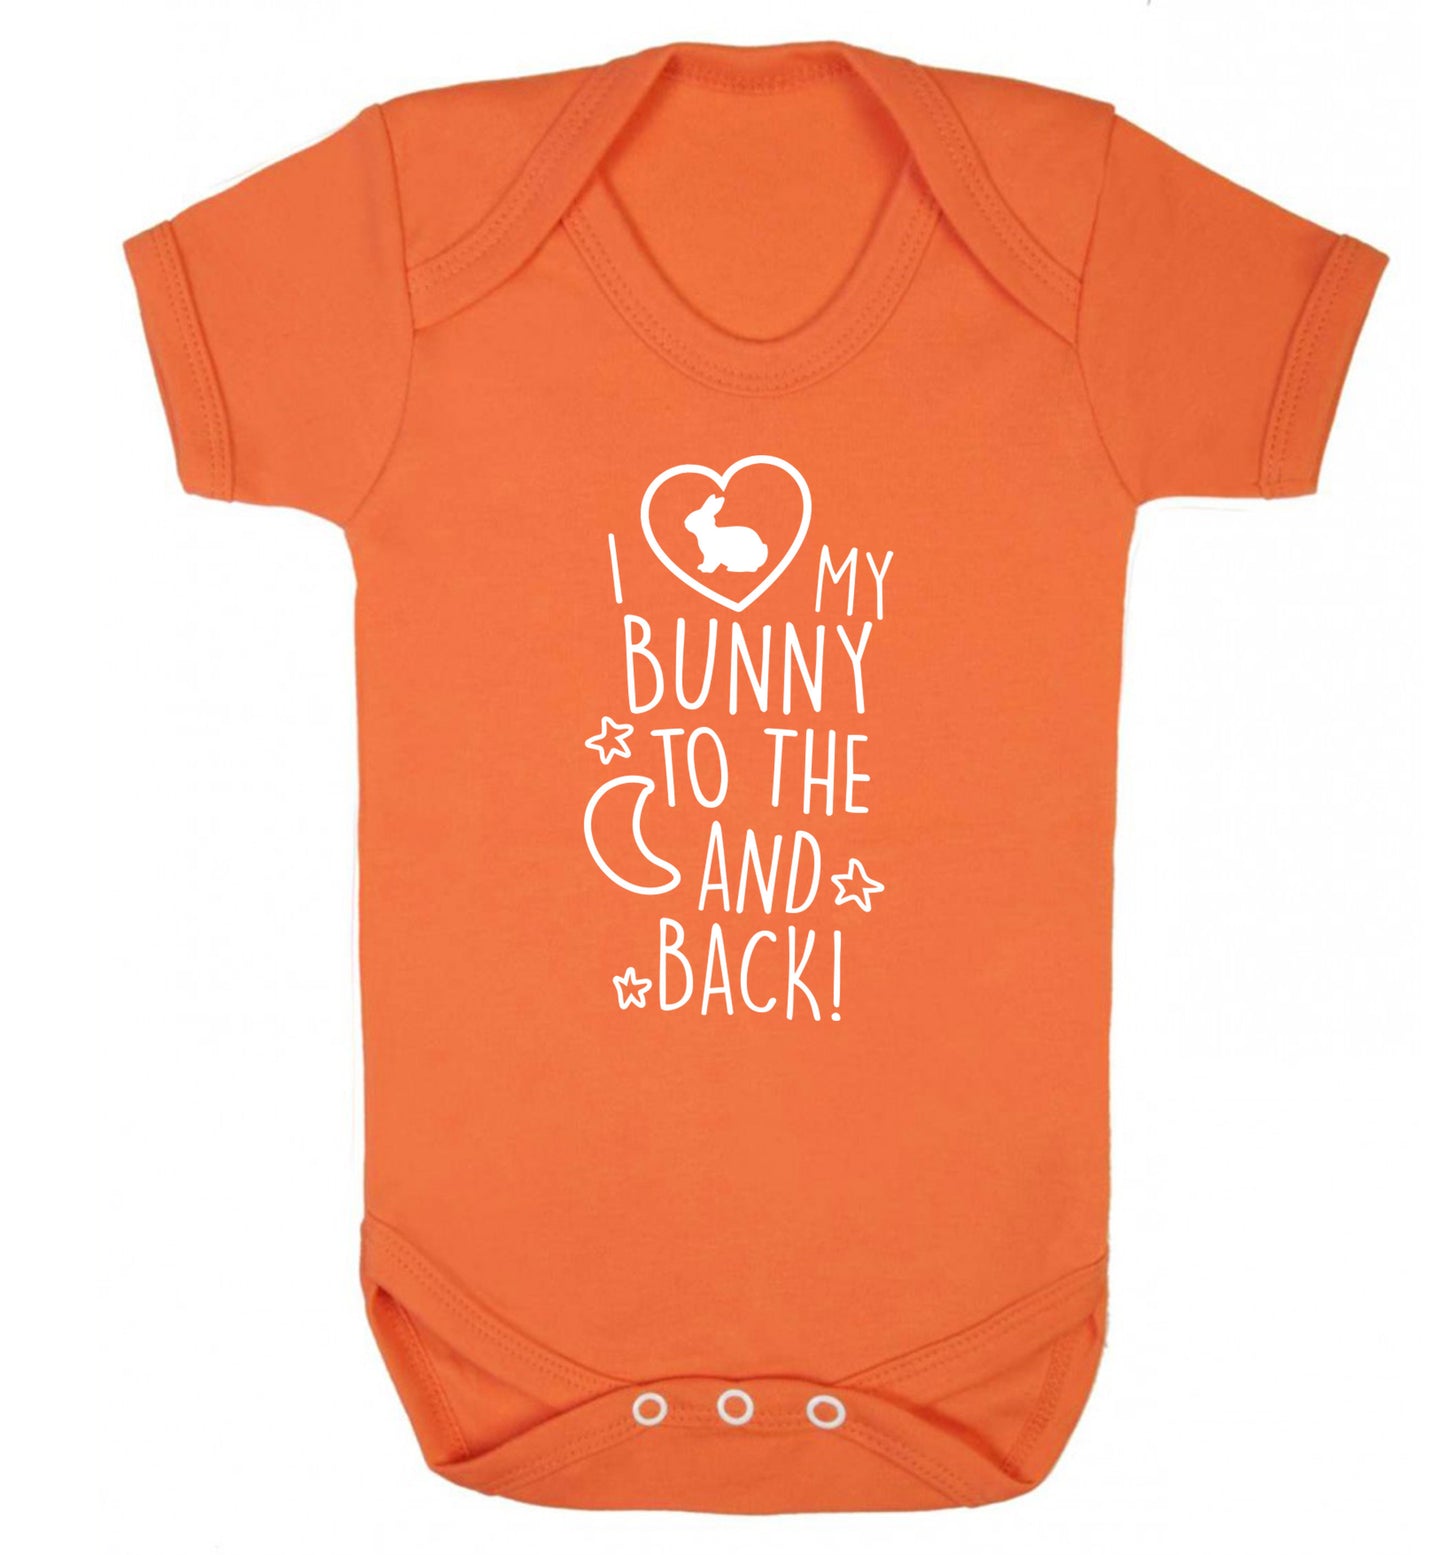 I love my bunny to the moon and back Baby Vest orange 18-24 months